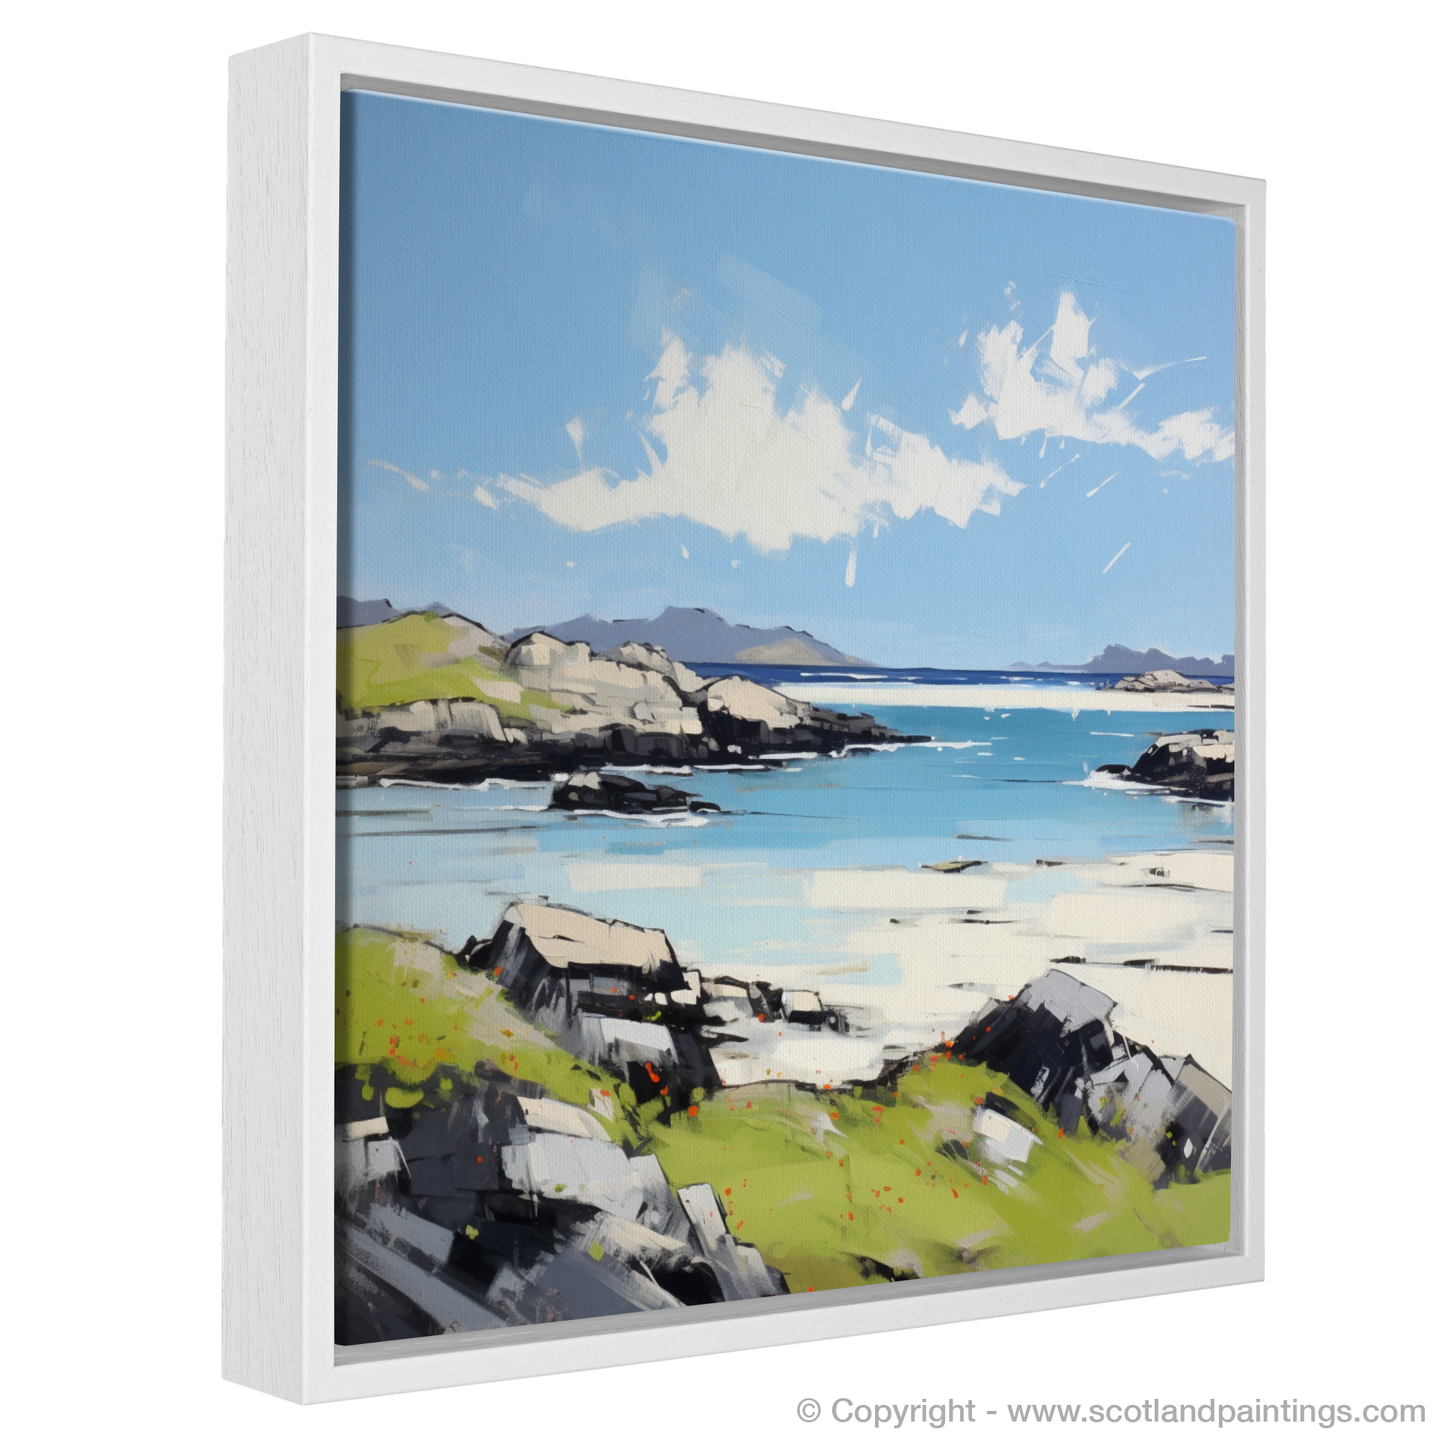 Painting and Art Print of Isle of Harris, Outer Hebrides in summer entitled "Summer Radiance of Isle of Harris".